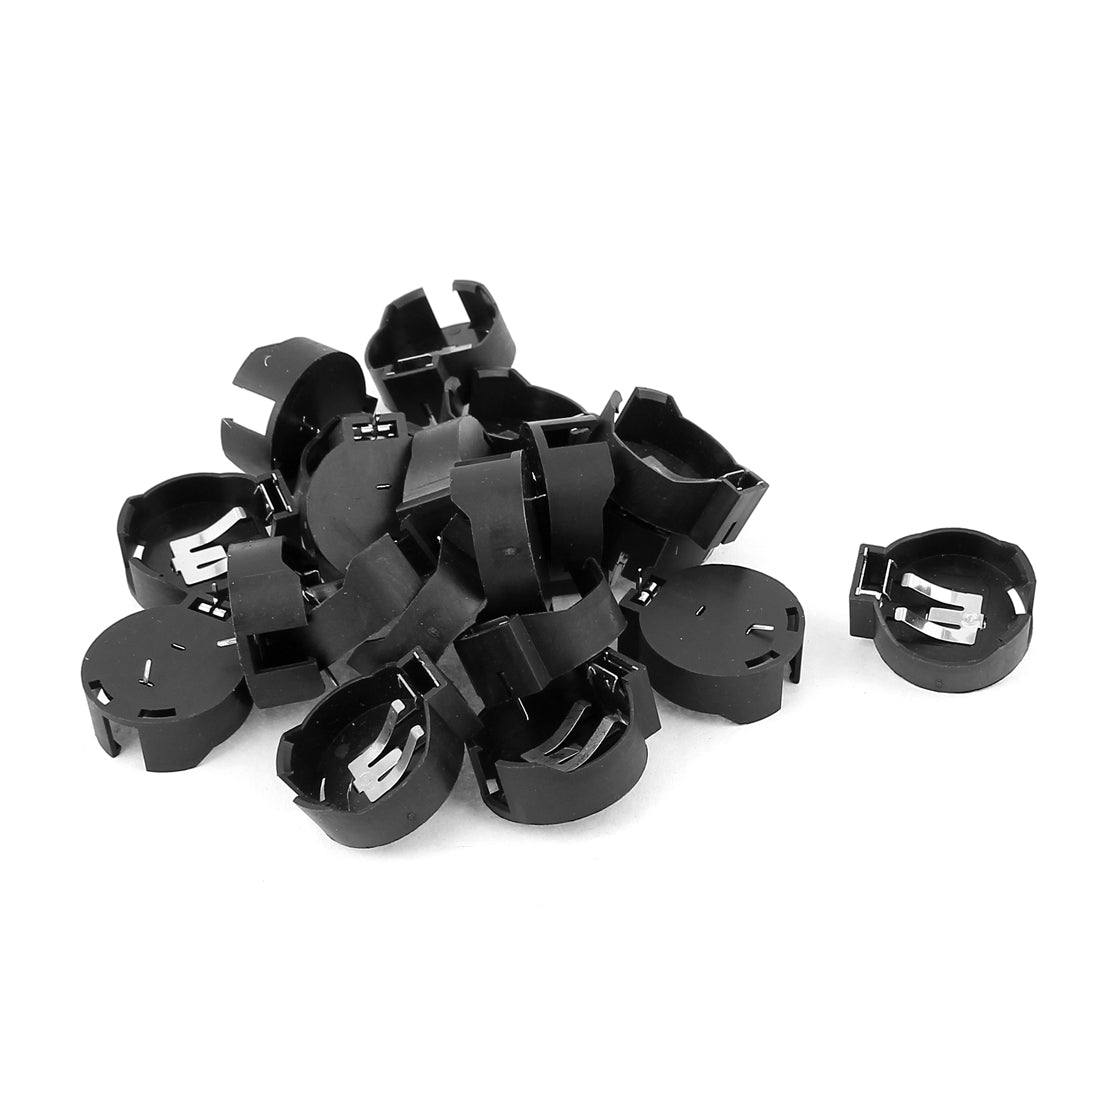 uxcell Uxcell 20pcs Plastic Shell CR2450 Cell Button Battery Sockets Holder Case Black